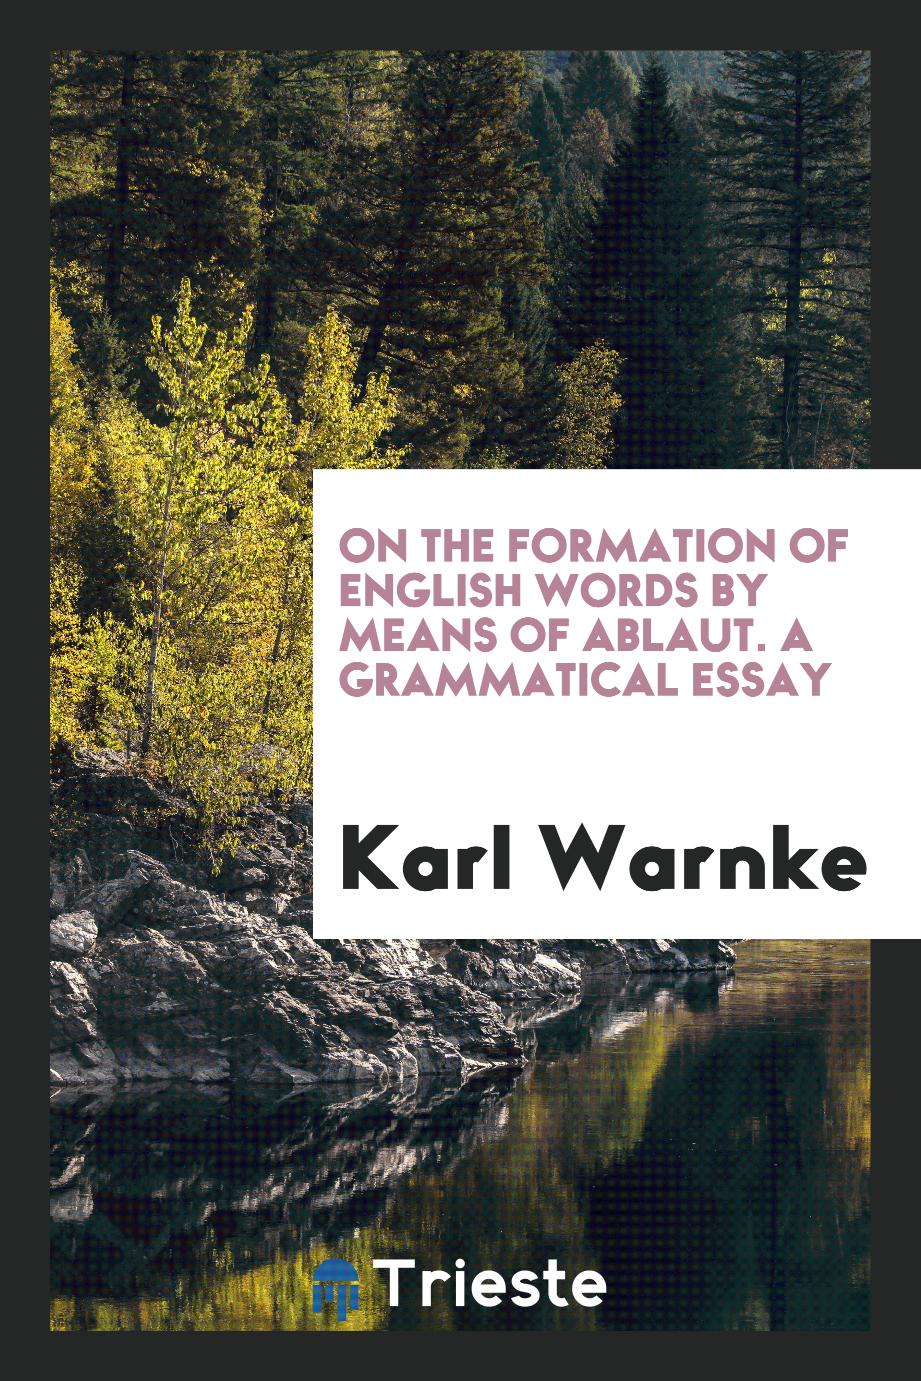 On the Formation of English Words by Means of Ablaut. A Grammatical Essay